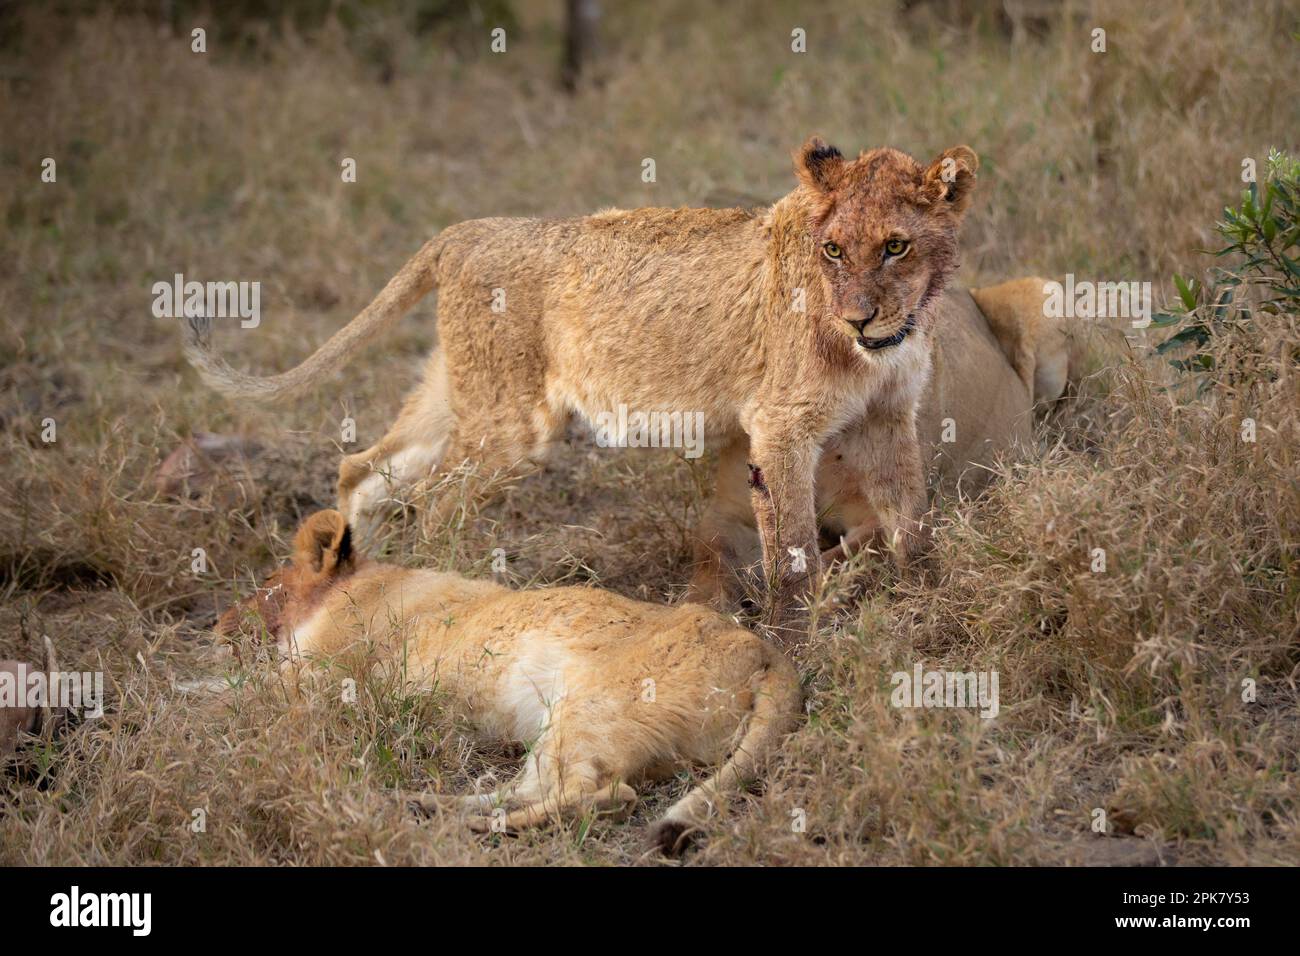 Lion cubs, Pathera leo, with their faces covered in blood after eating. Stock Photo